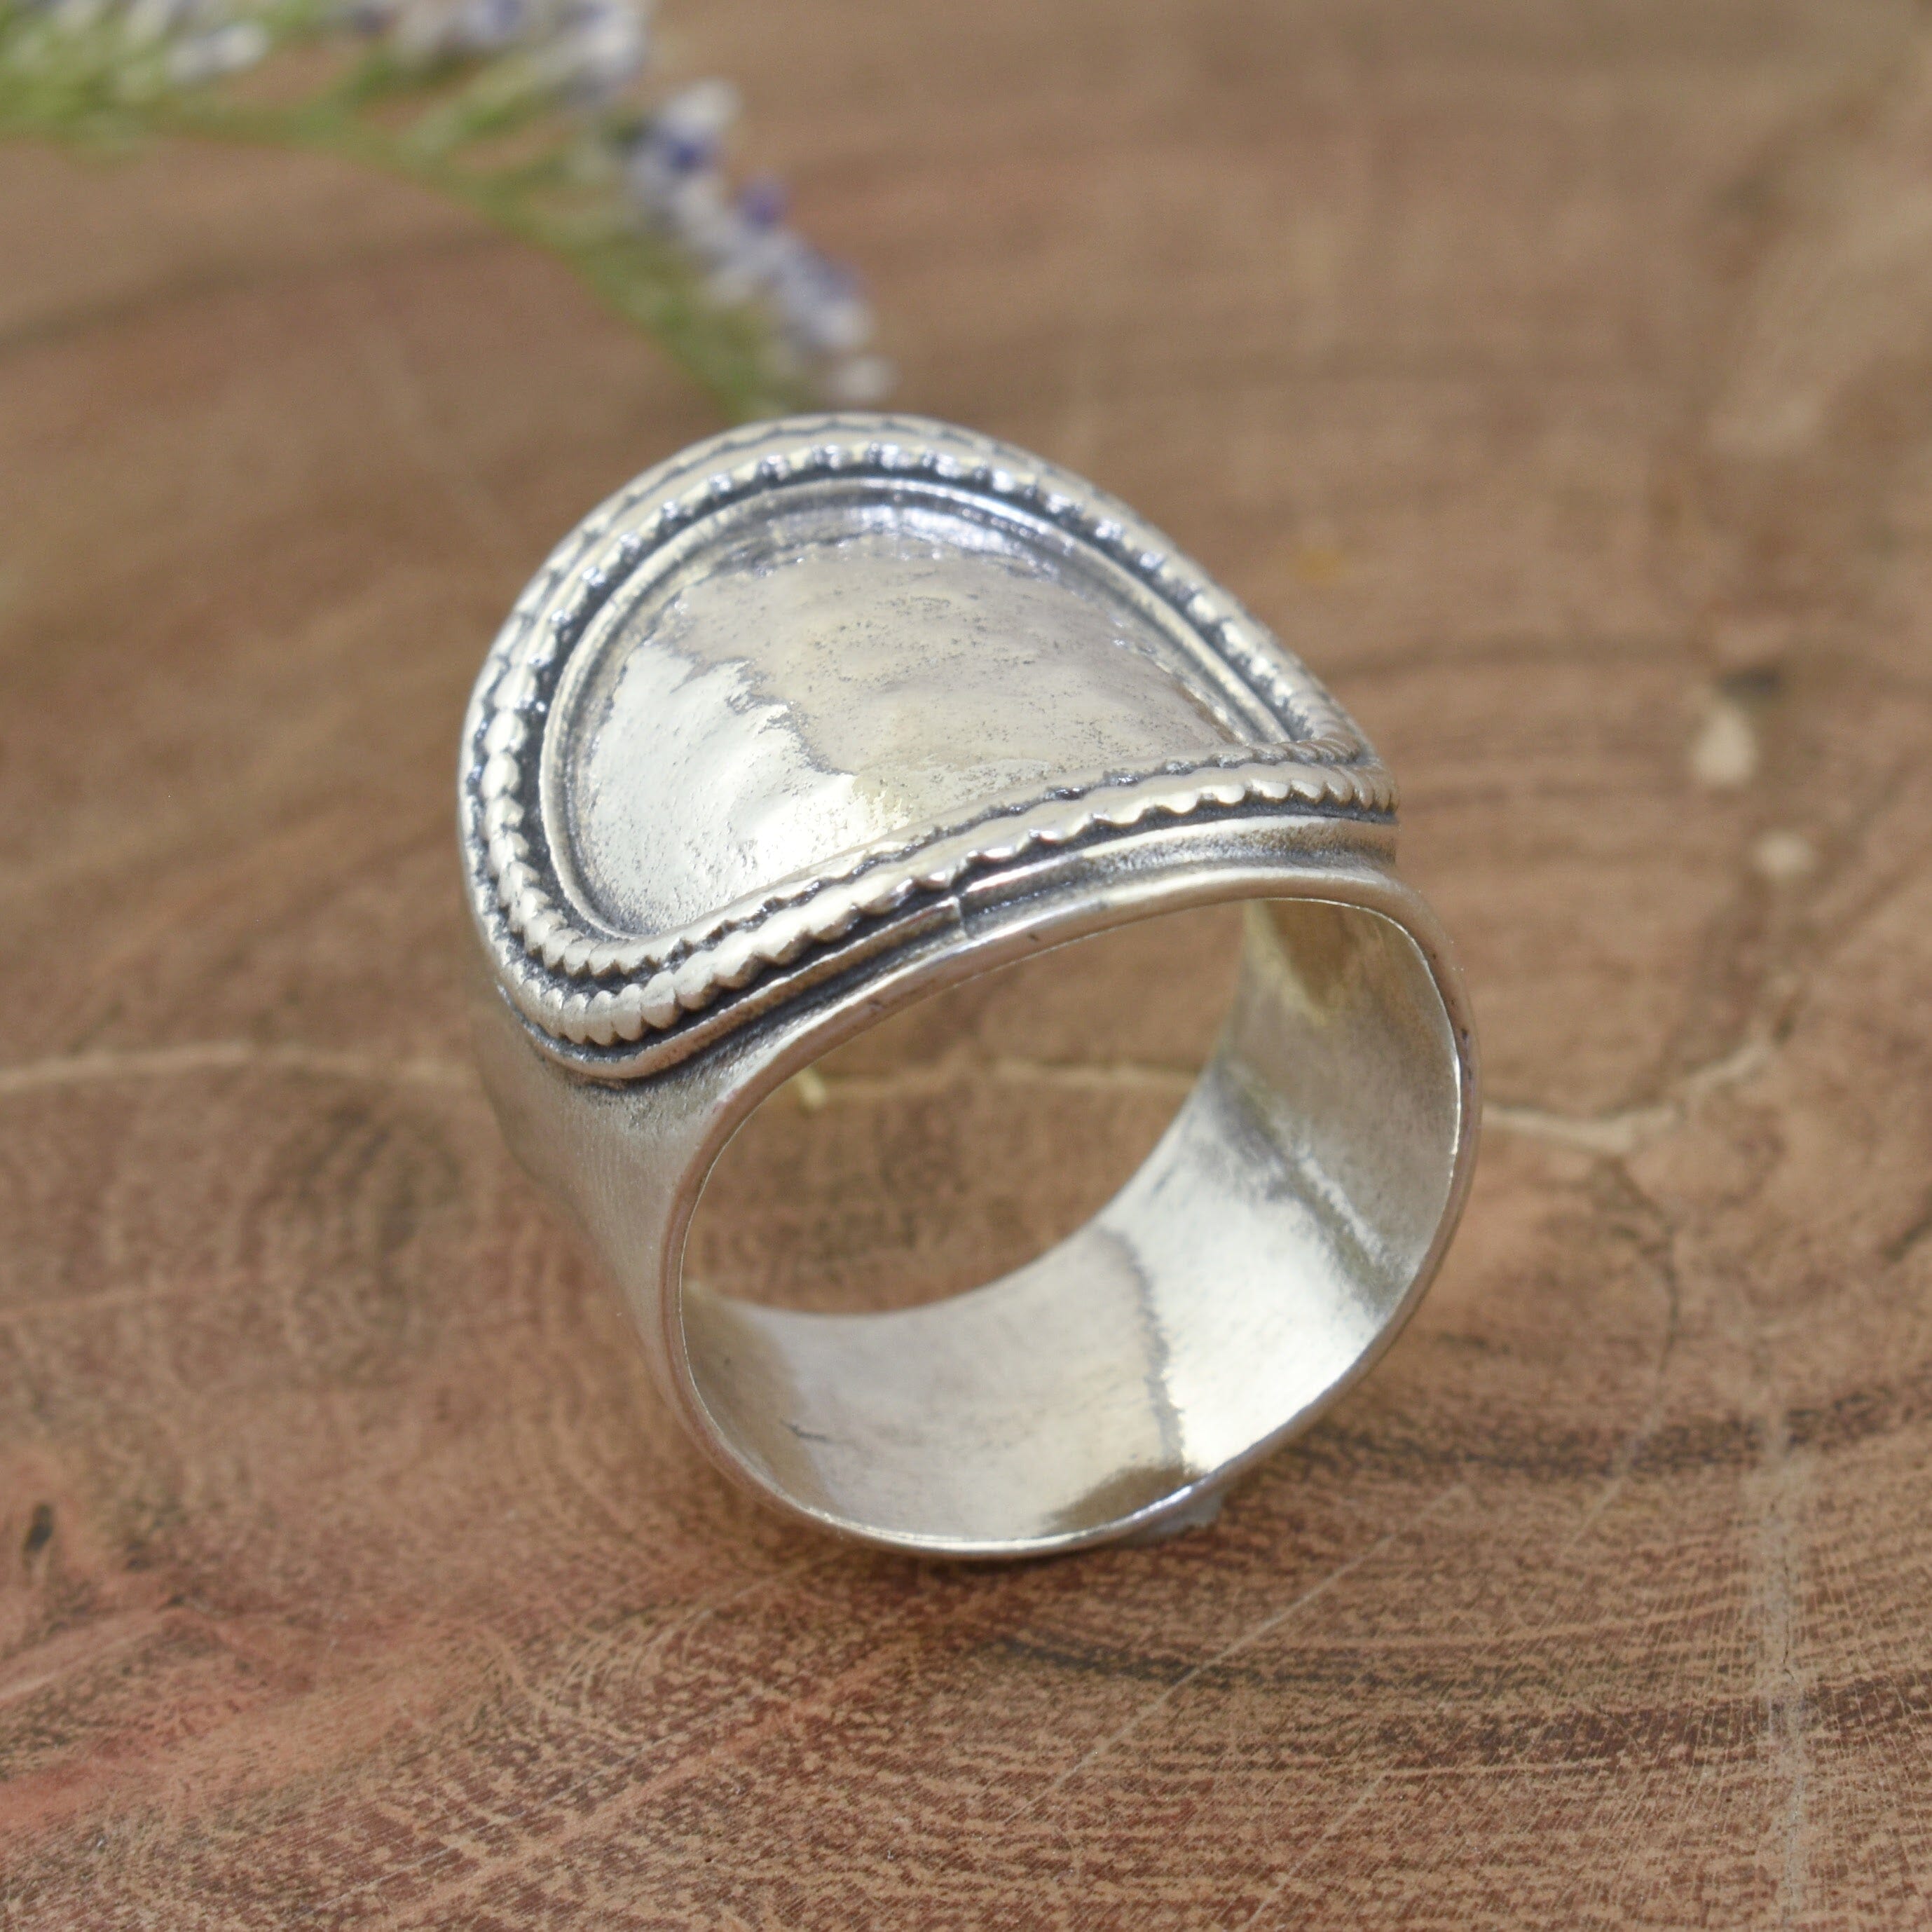 .925 sterling silver saddle ring with a decorative frame